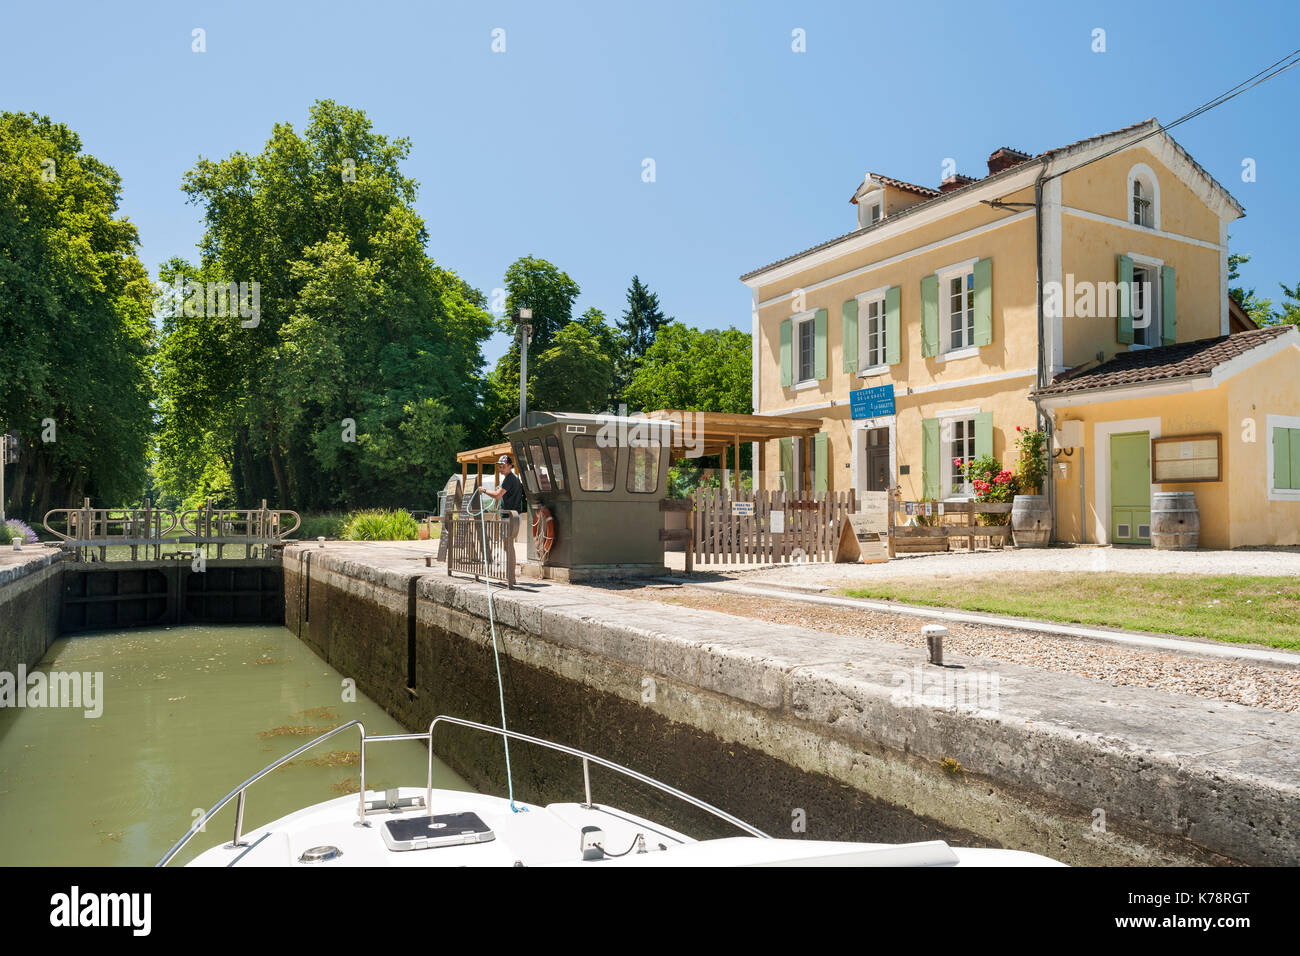 View from a canal boat in a lock (the Écluse de la Gaule) on the Canal latéral à la Garonne in the Dordogne region of southwest France. Stock Photo